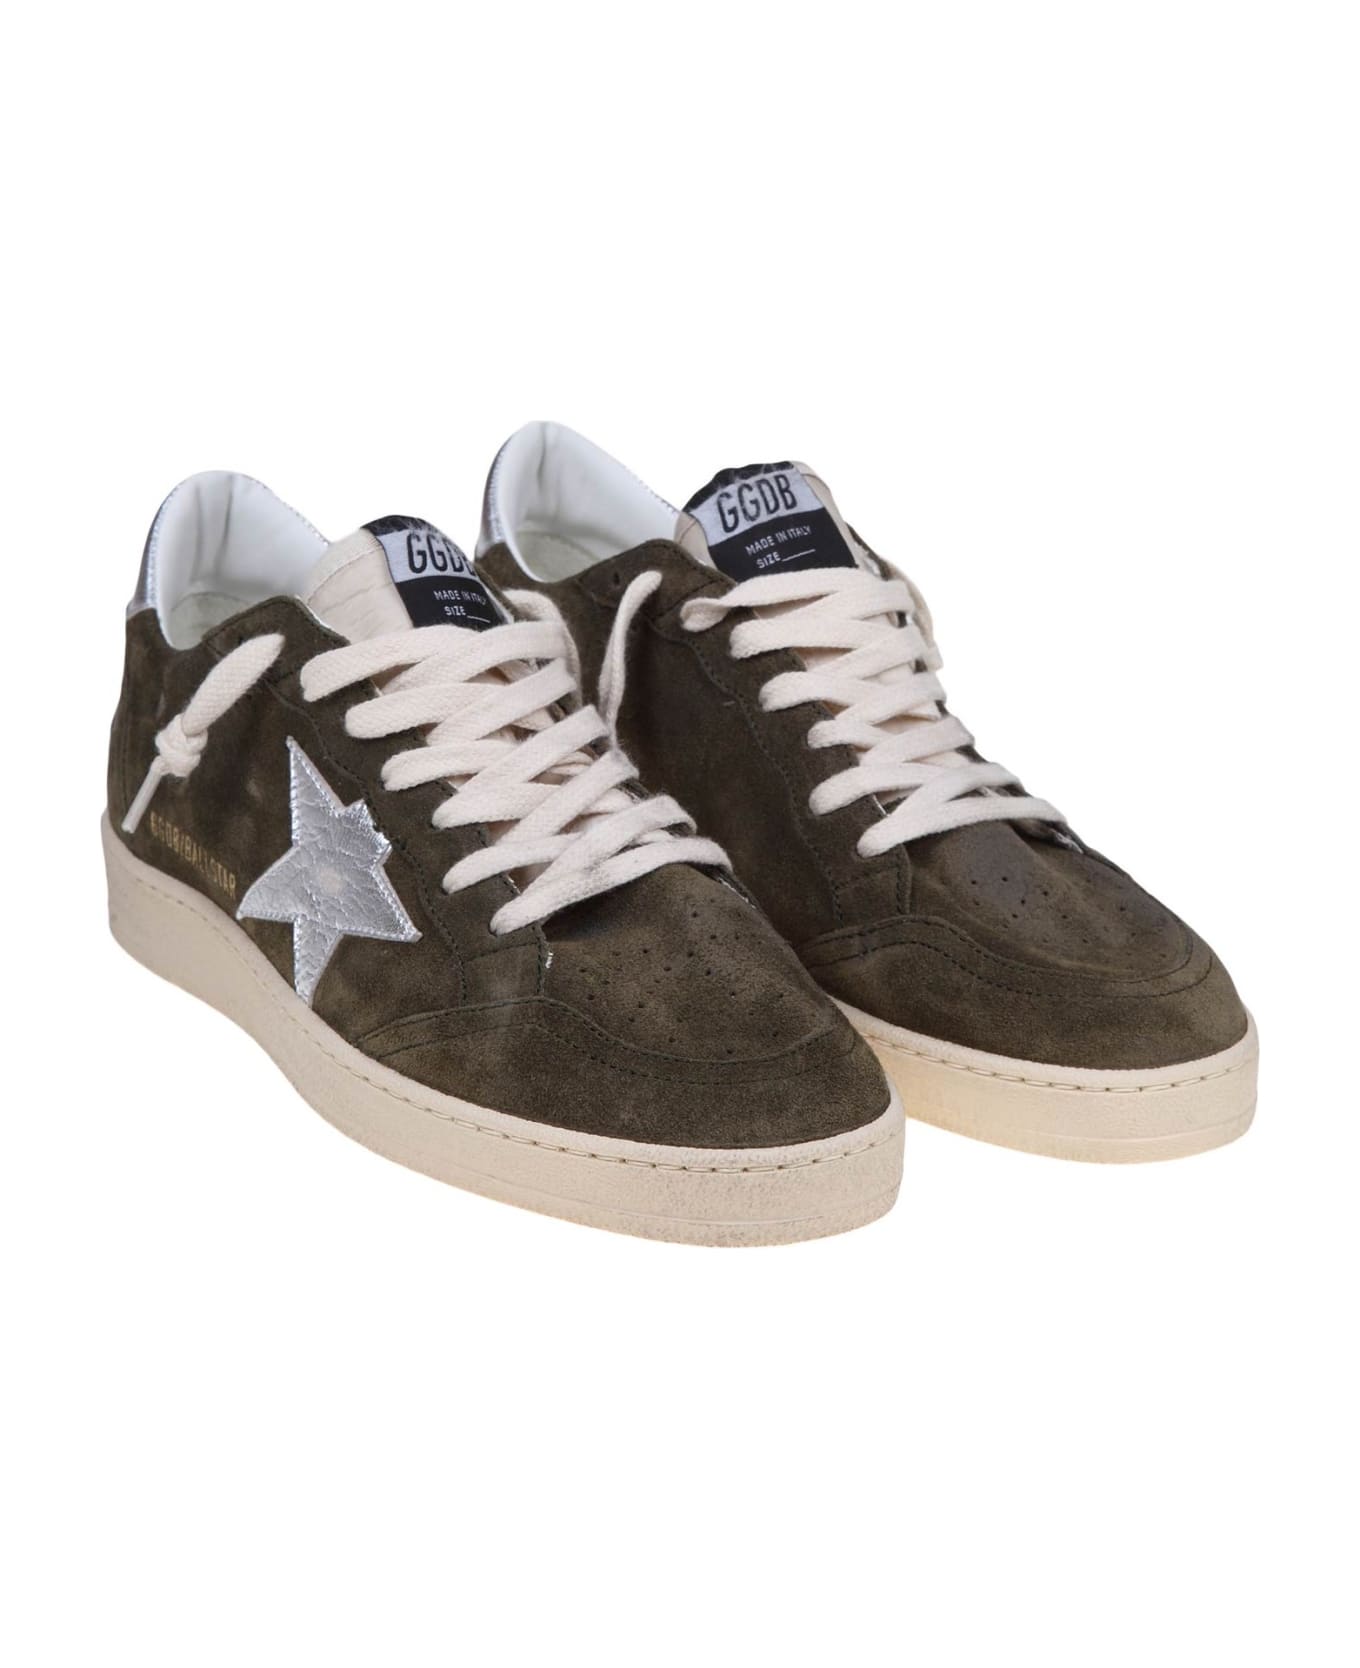 Golden Goose Ball Star Sneakers - Olive